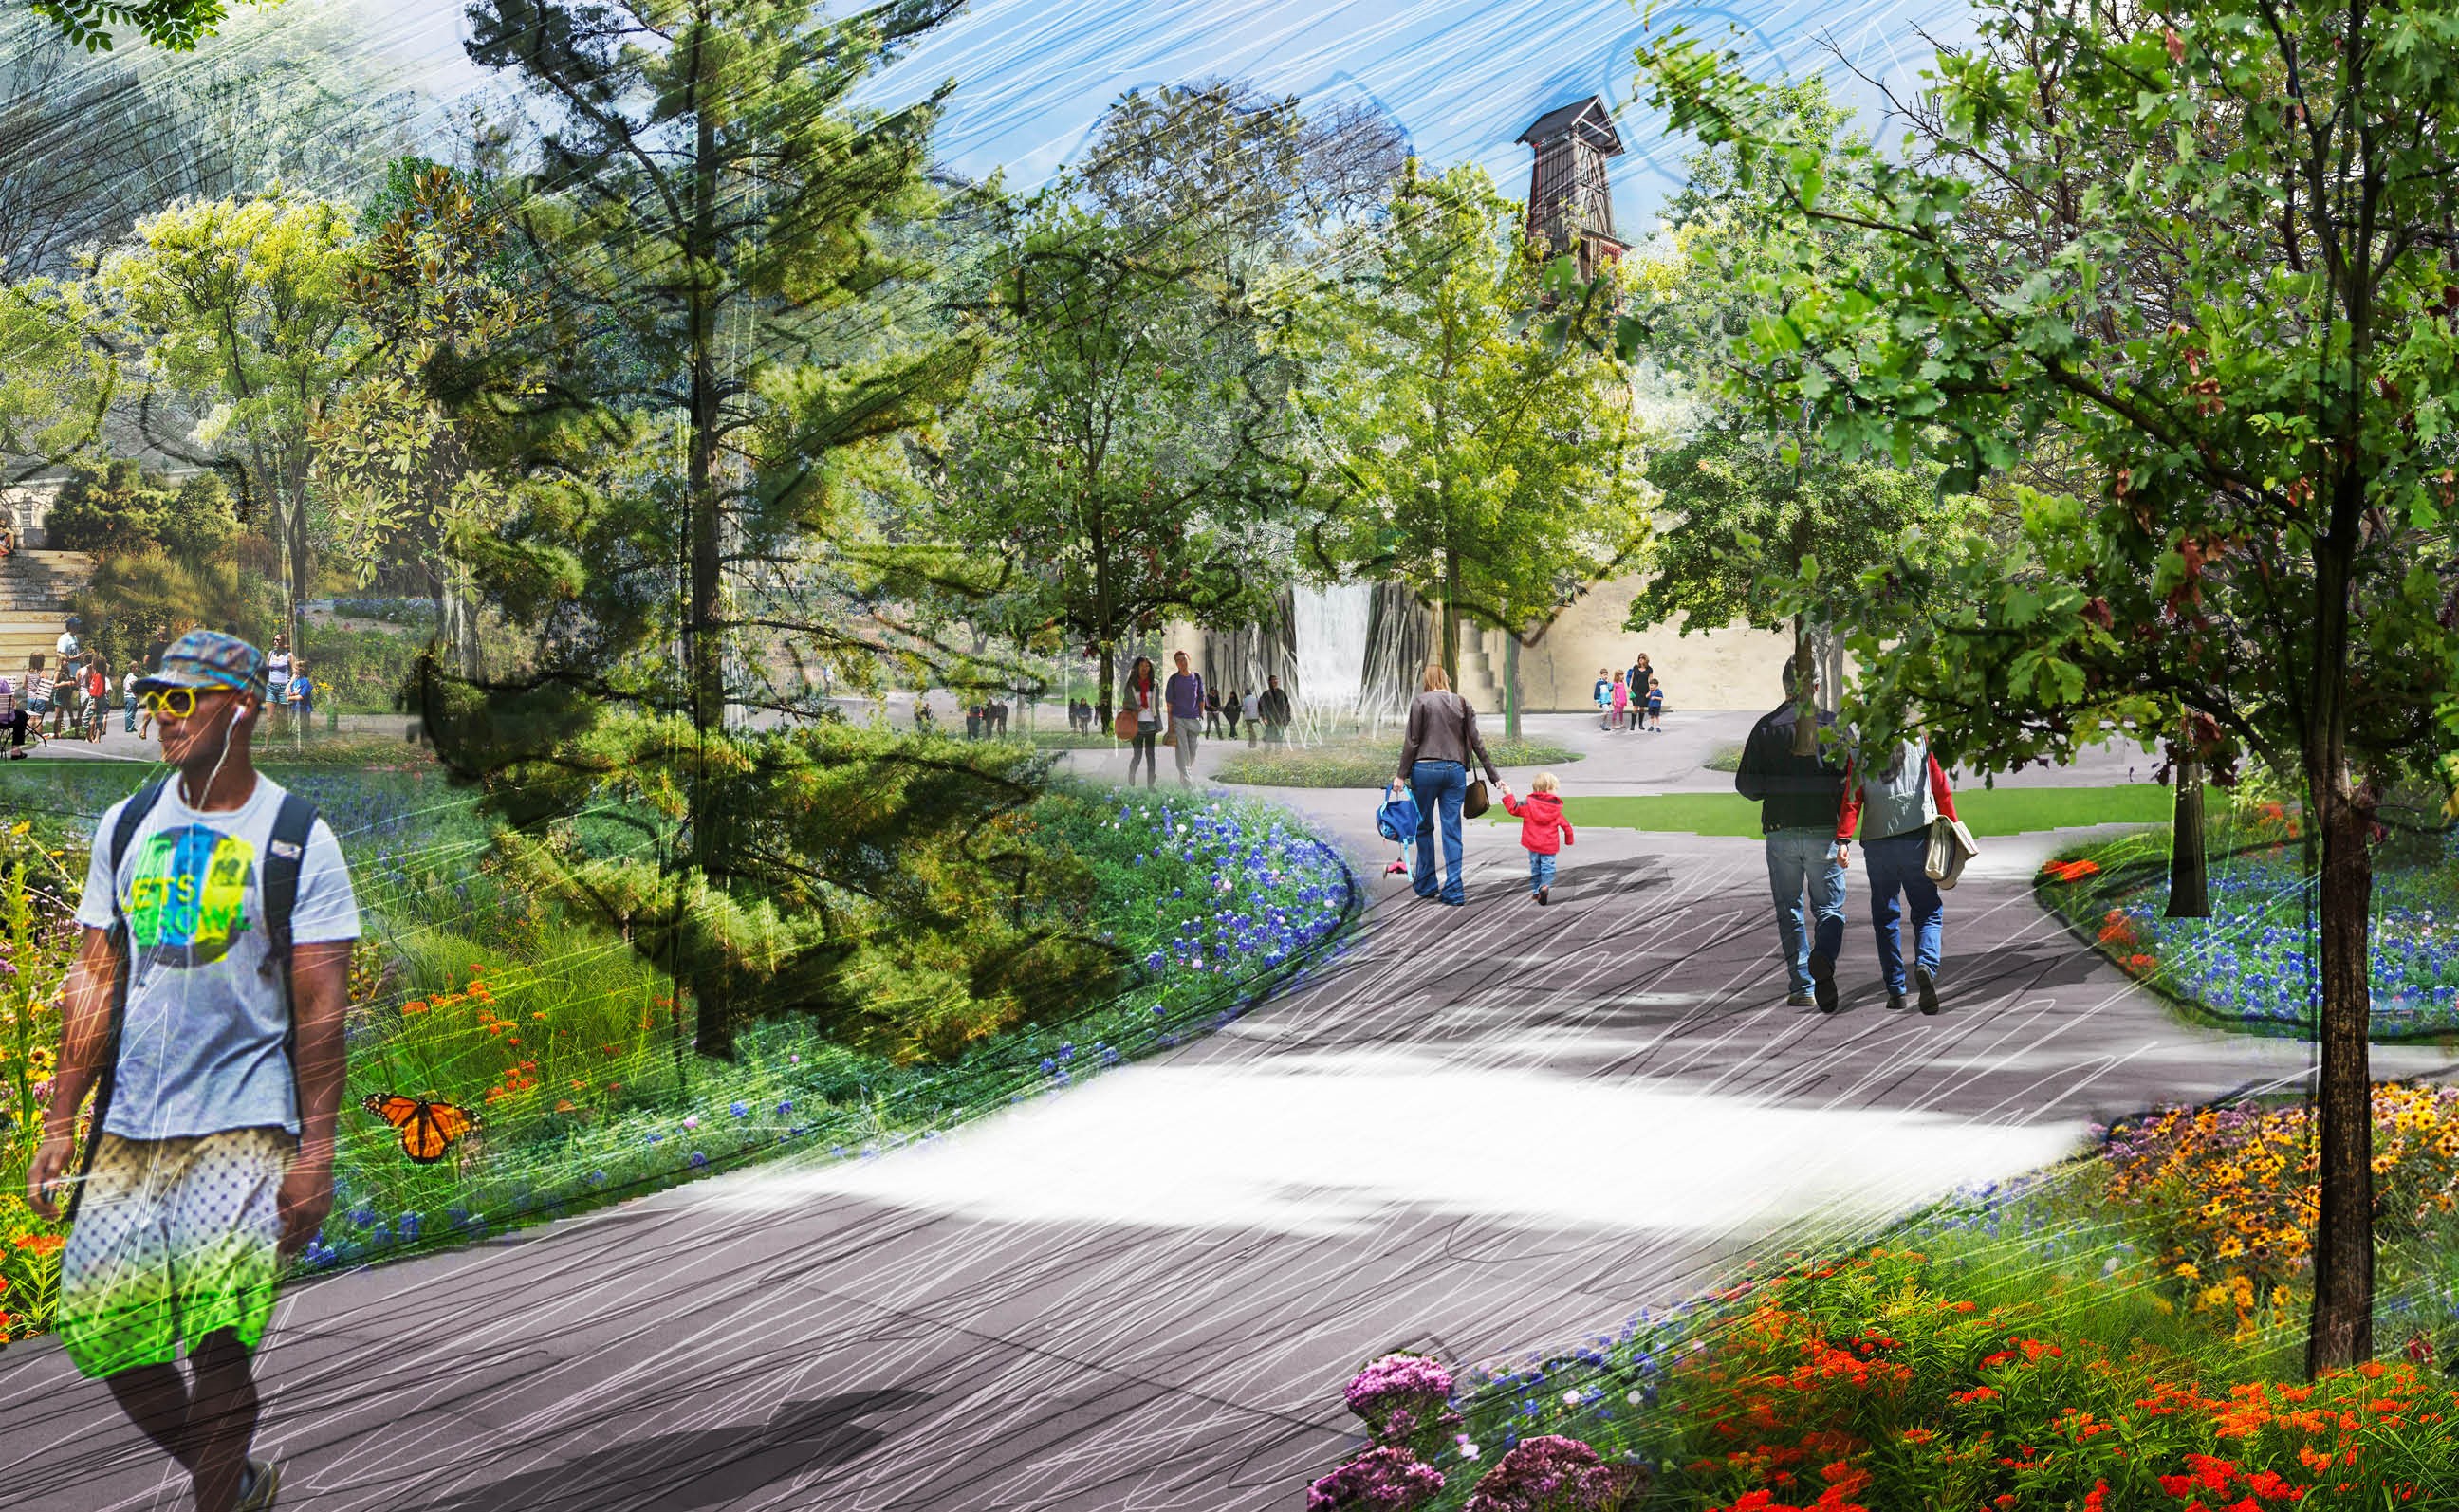 People walking through paths and gardens in Gipson Play Plaza design rendering